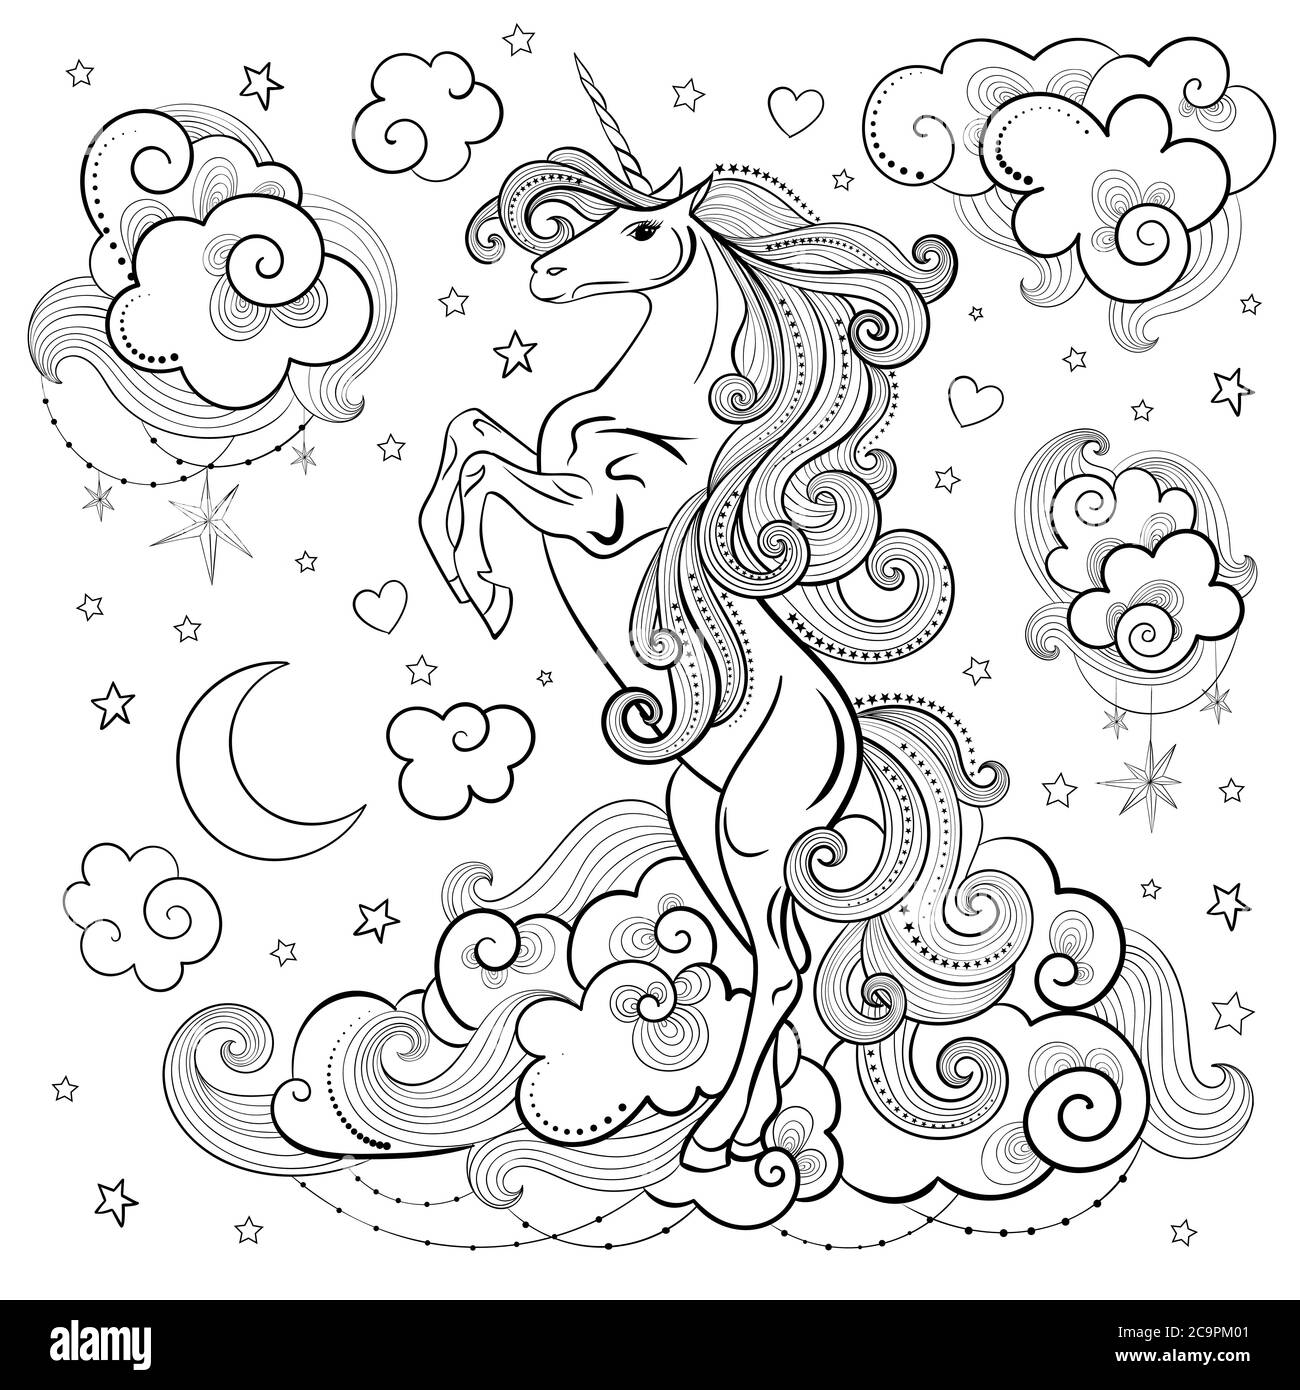 Cute unicorn on the clouds, black and white. Doodle style. Fantasy animal. For the design of prints, posters, stickers, tattoos, cards and so on. Vect Stock Vector